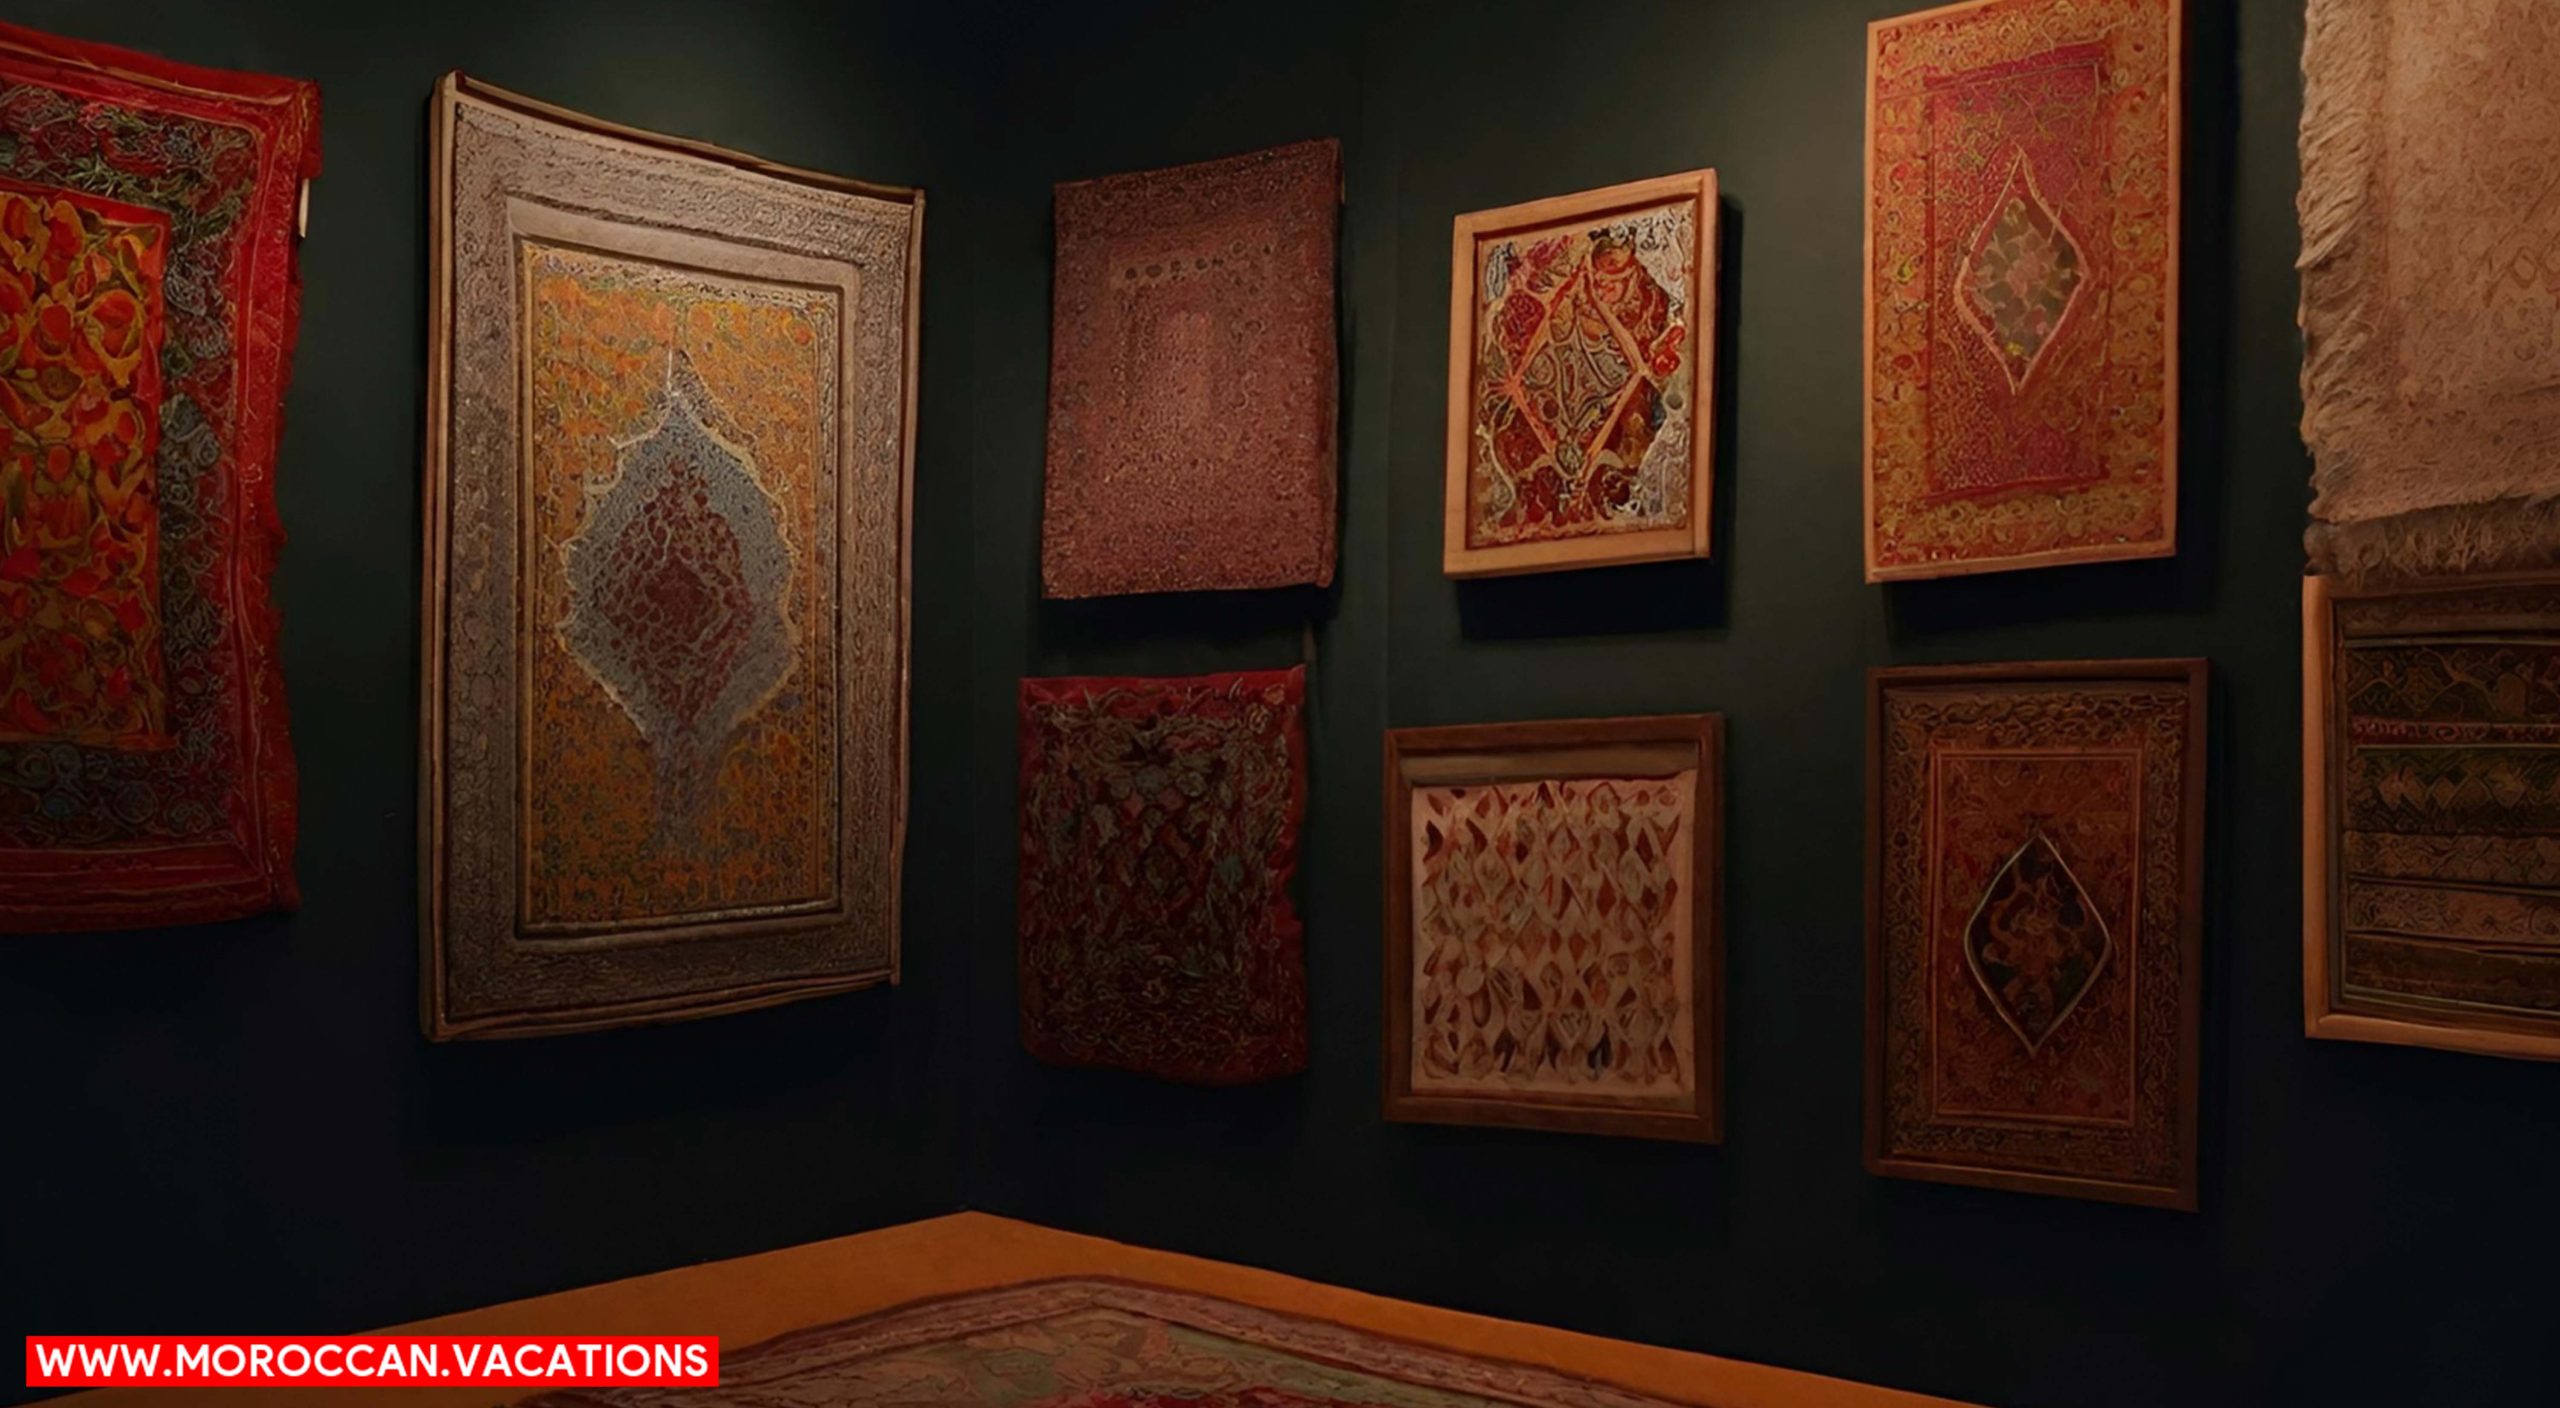 Vibrant atmosphere of a Moroccan art gallery, adorned with intricate handcrafted tapestries and filled with diverse artworks.